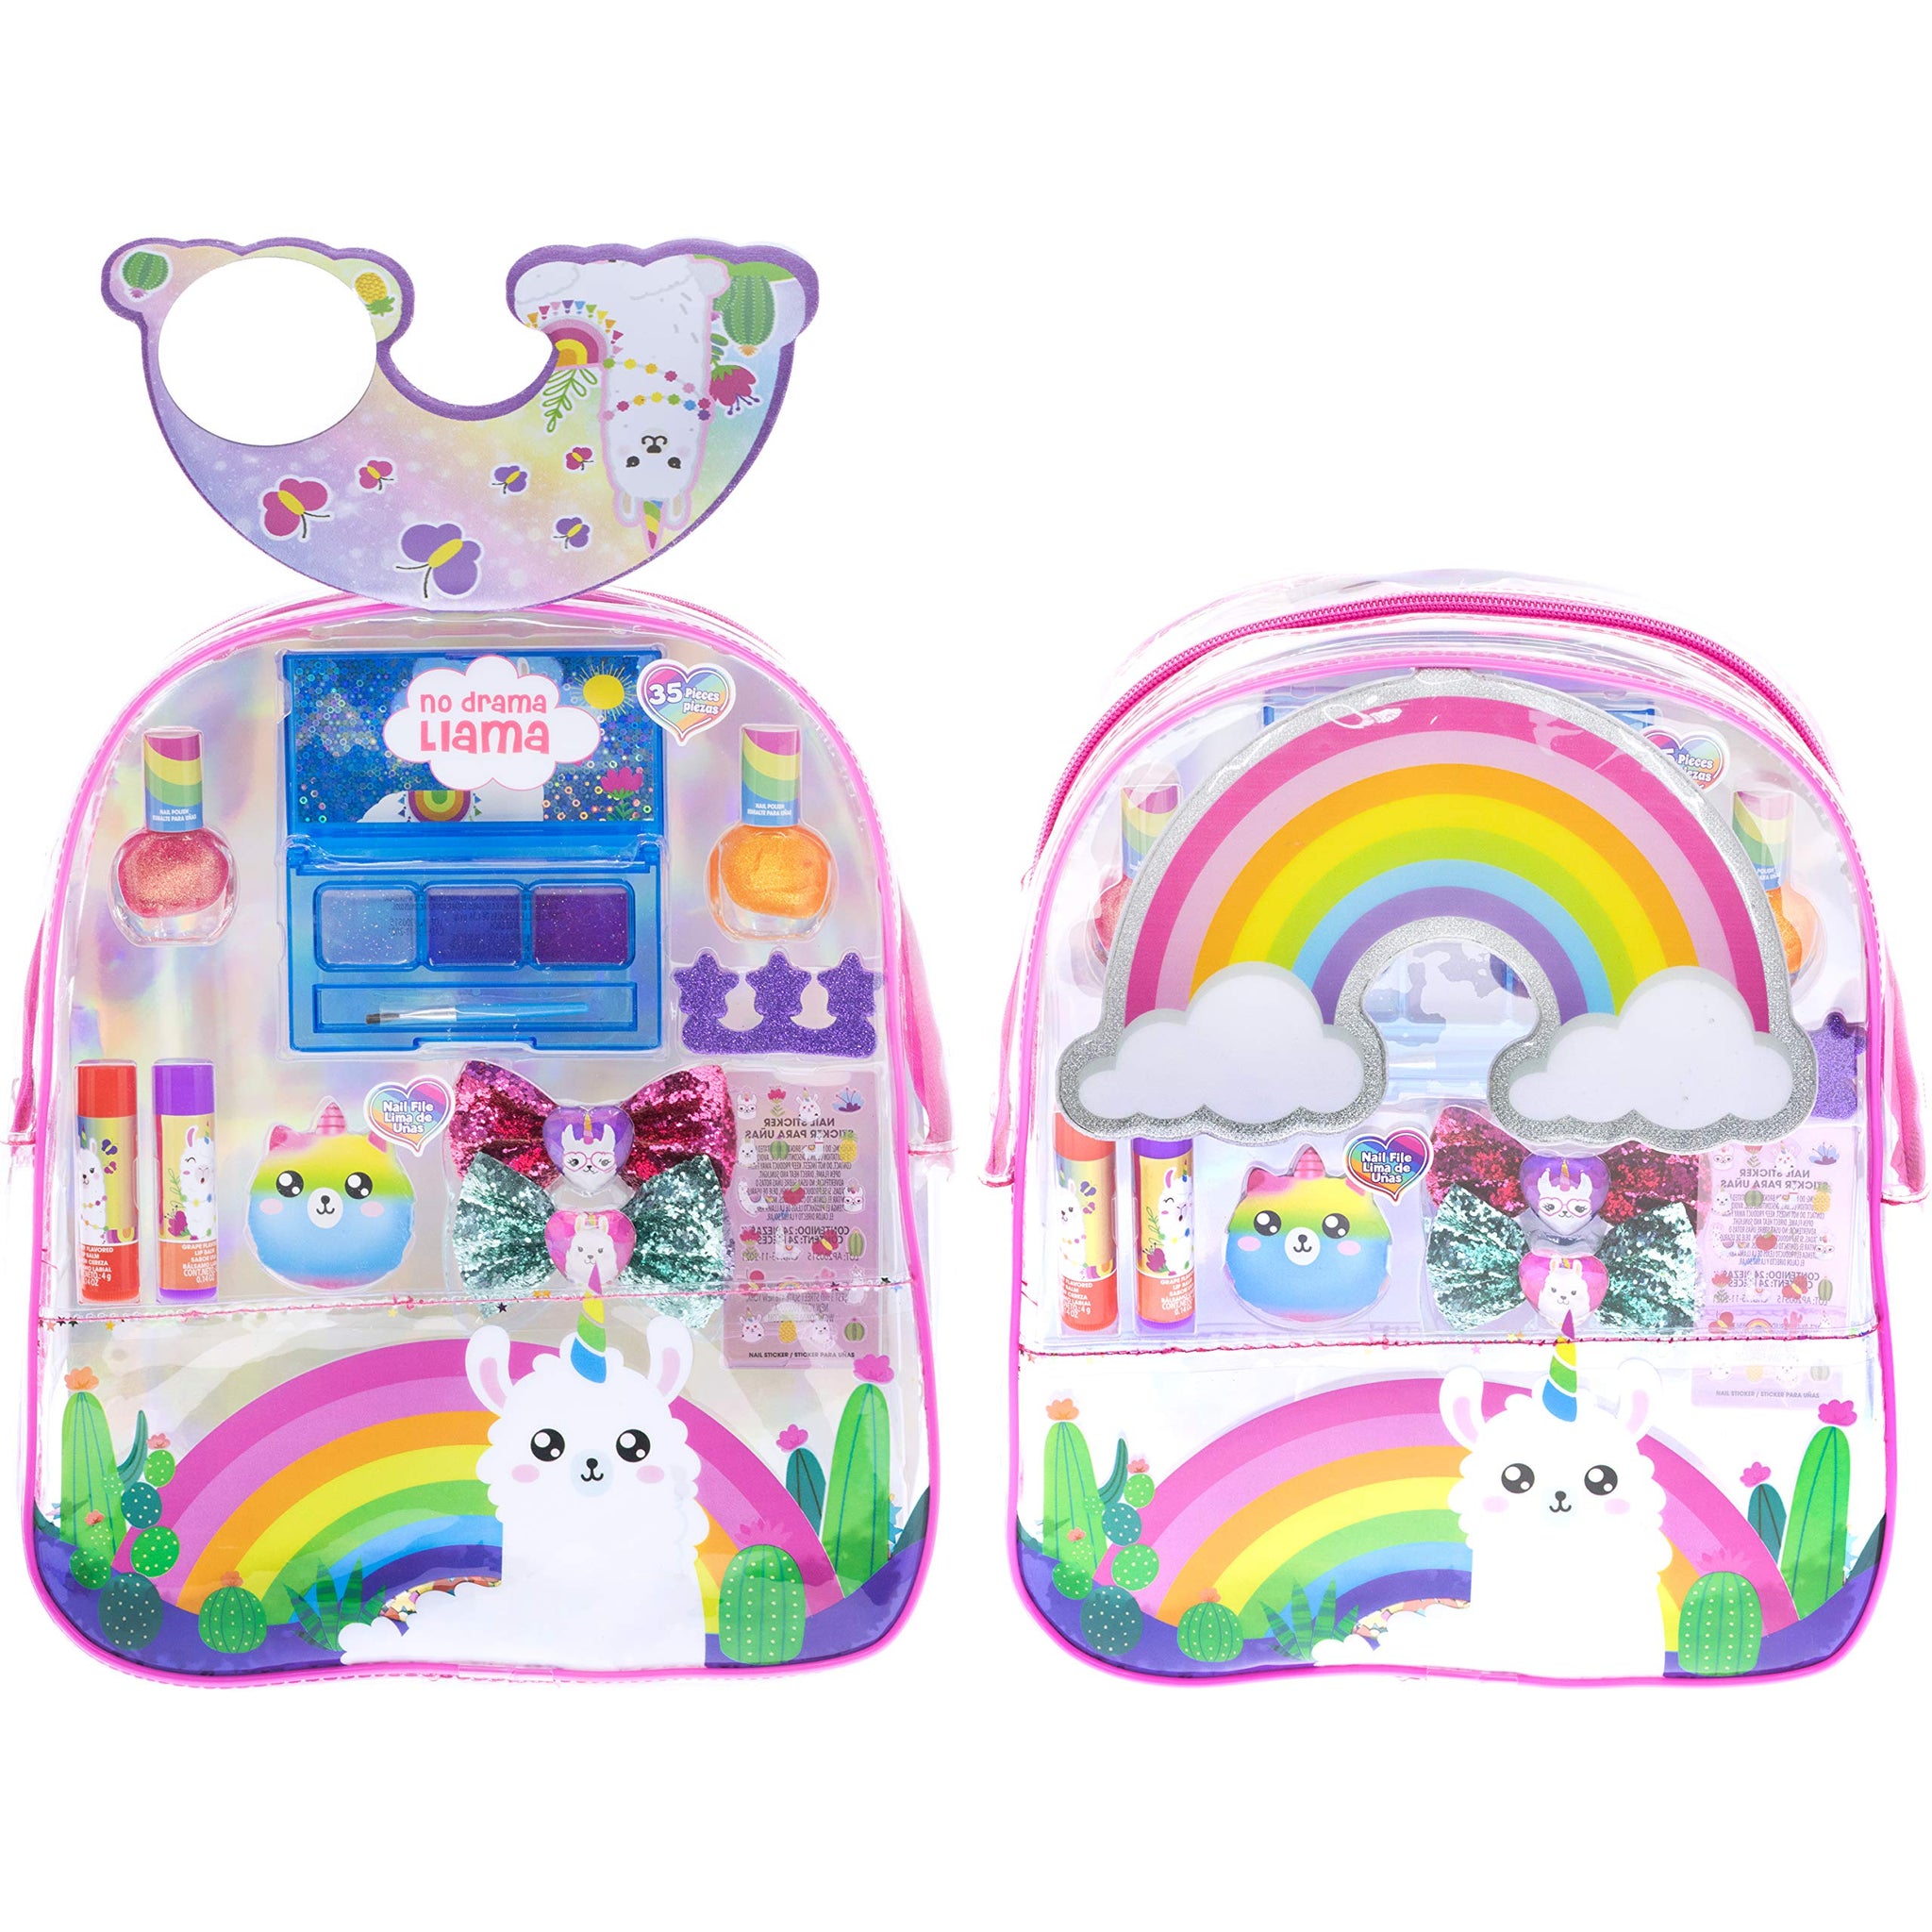 L.O.L Surprise! Townley Girl Makeup Filled Backpack Set with 10 Pieces, Including Lip Gloss, Nail Polish, Nail Stones and Keychain